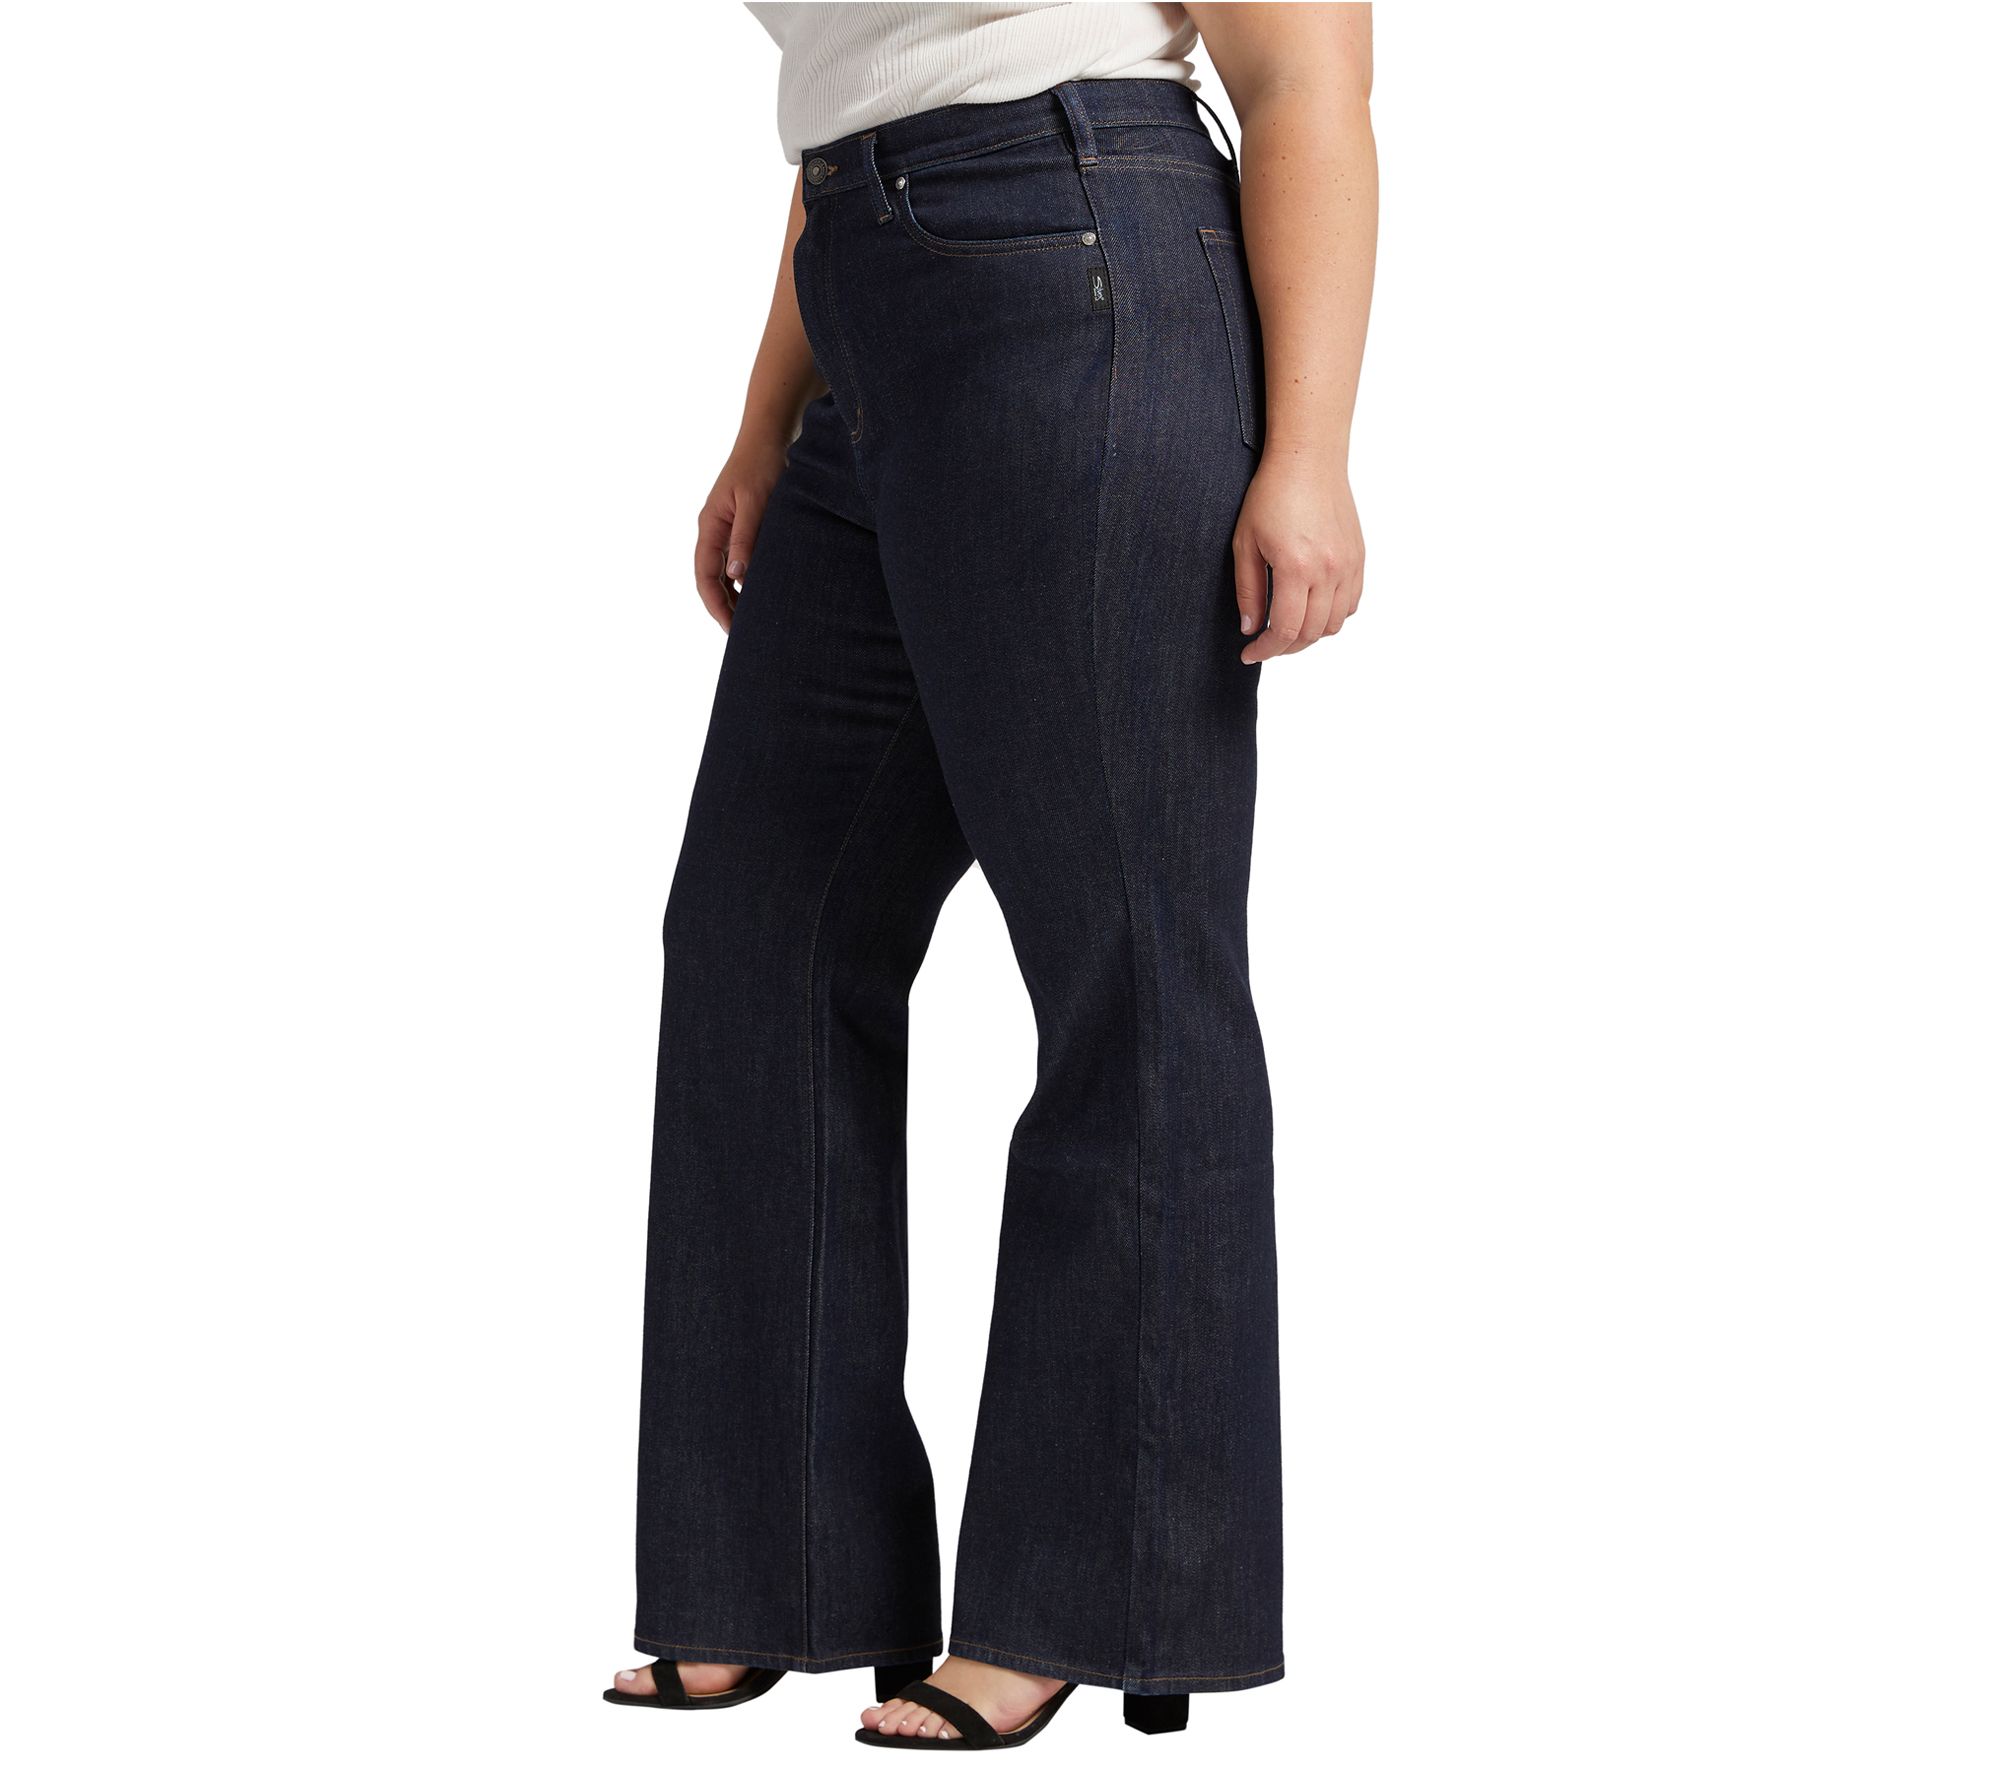 Silver Jeans Co. Plus Size Highly Desirable Trouser Jean - QVC.com